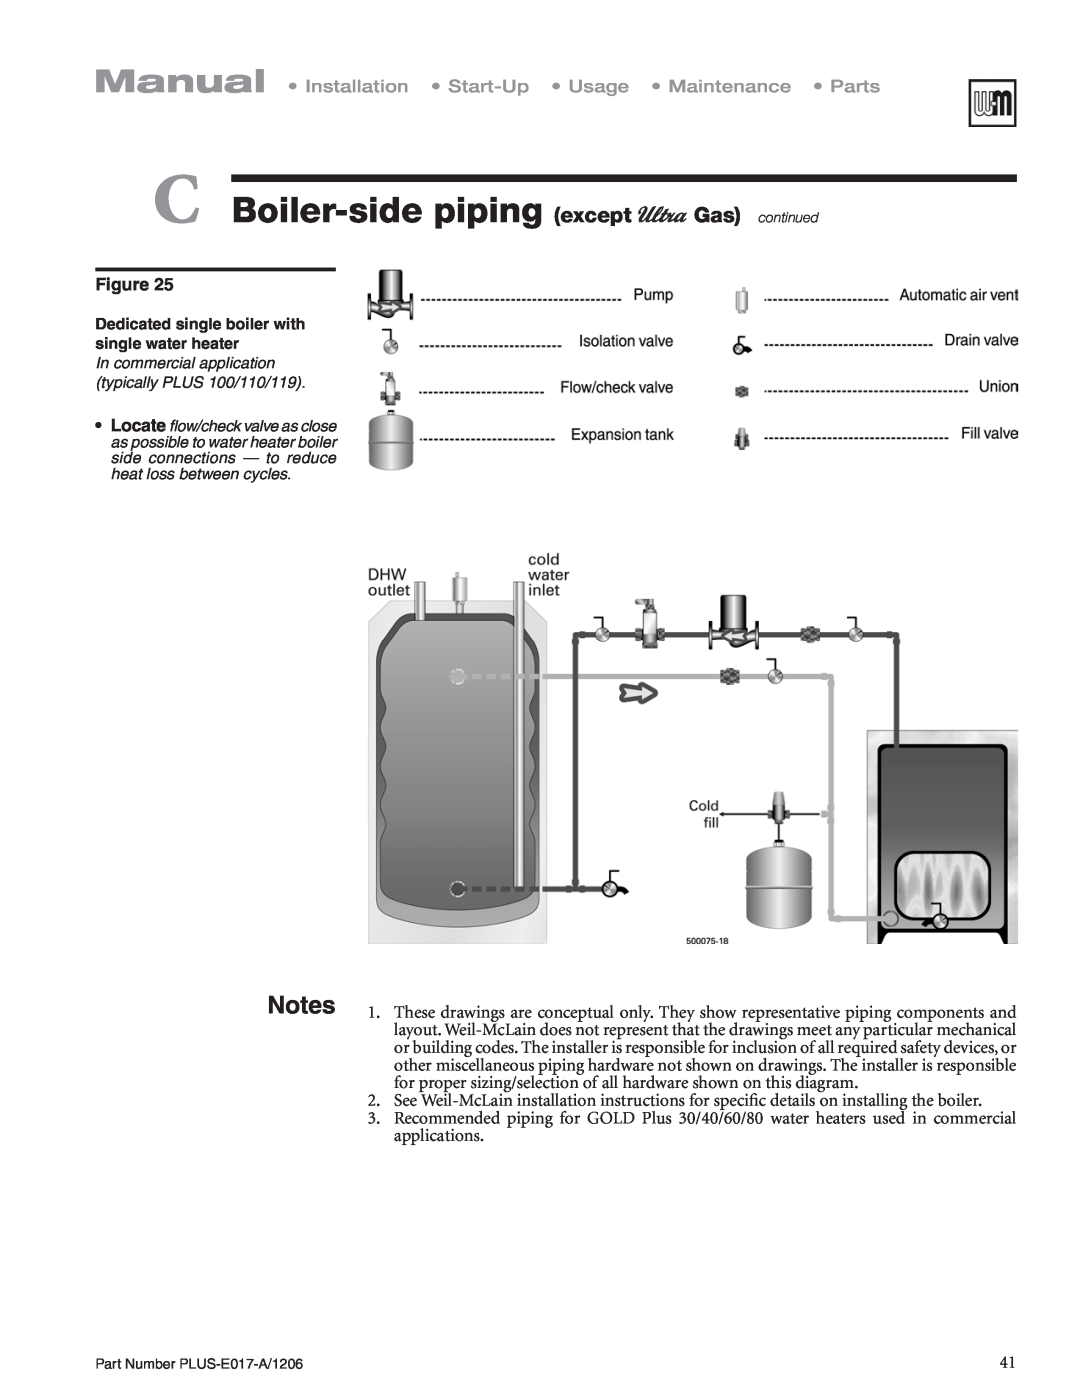 Weil-McLain PLUS-E017-A/1206 manual C Boiler-sidepiping except Gas continued, applications 